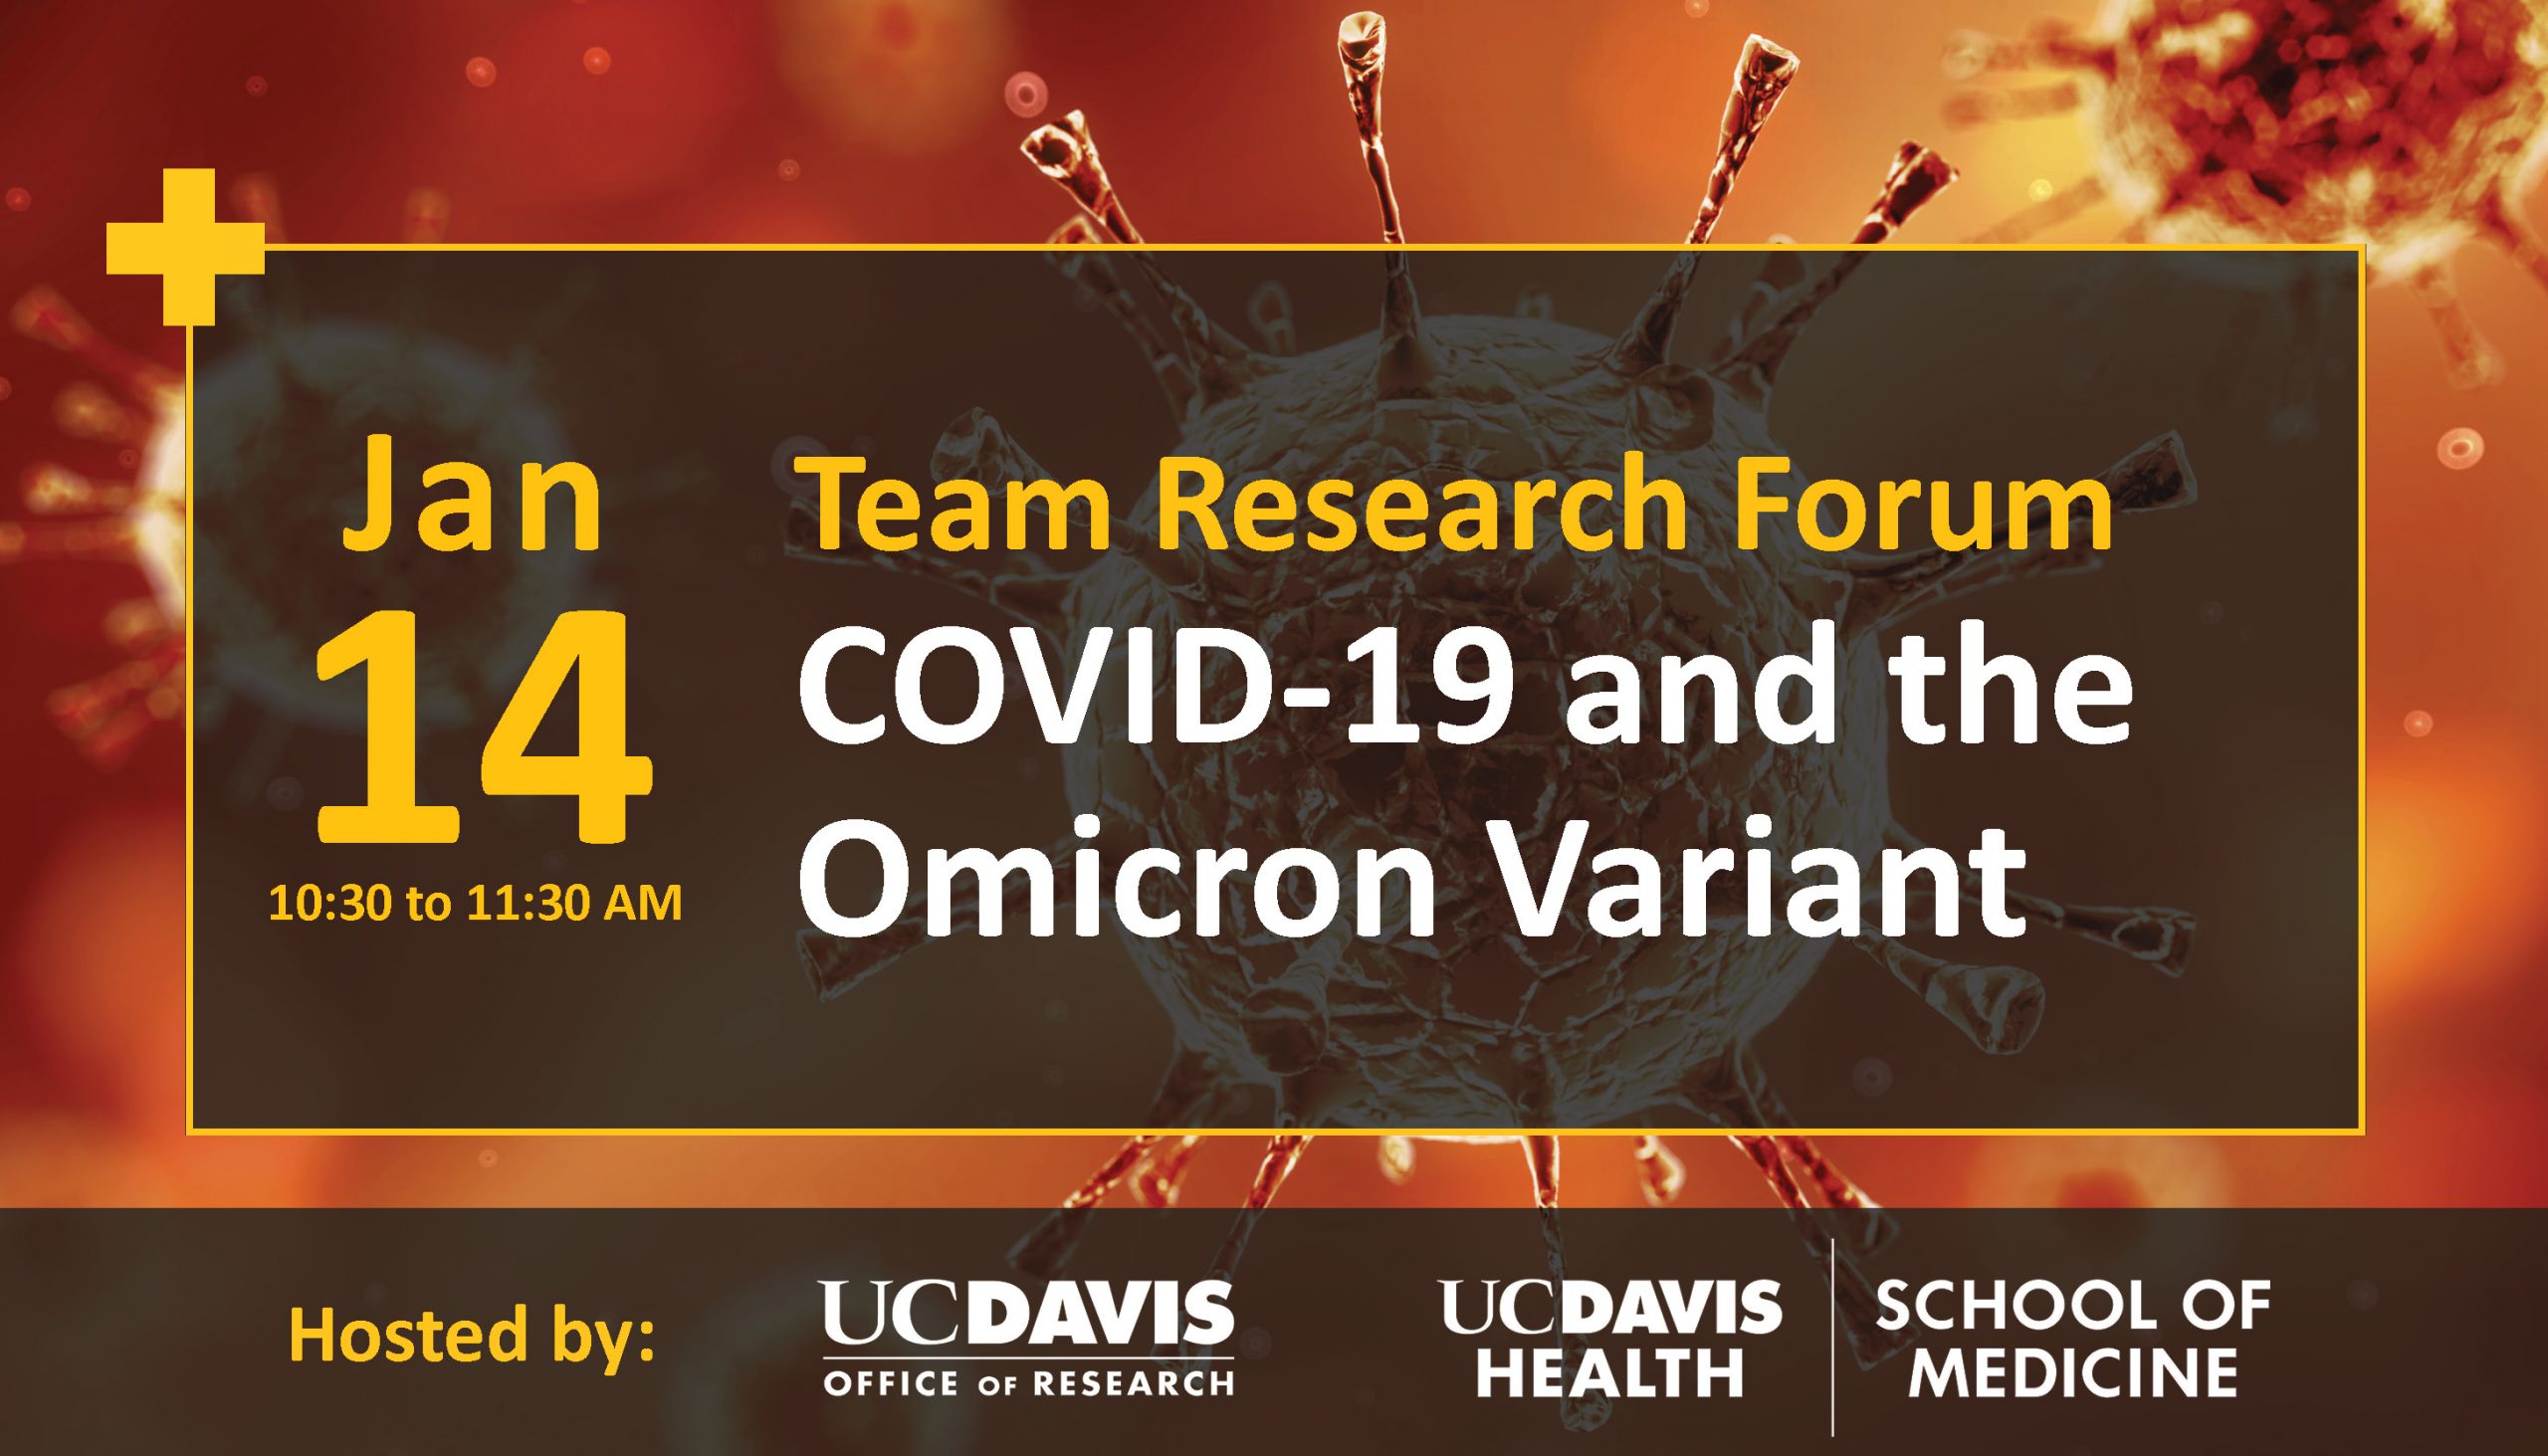 Team Research Forum: COVID-19 and the Omicron Variant